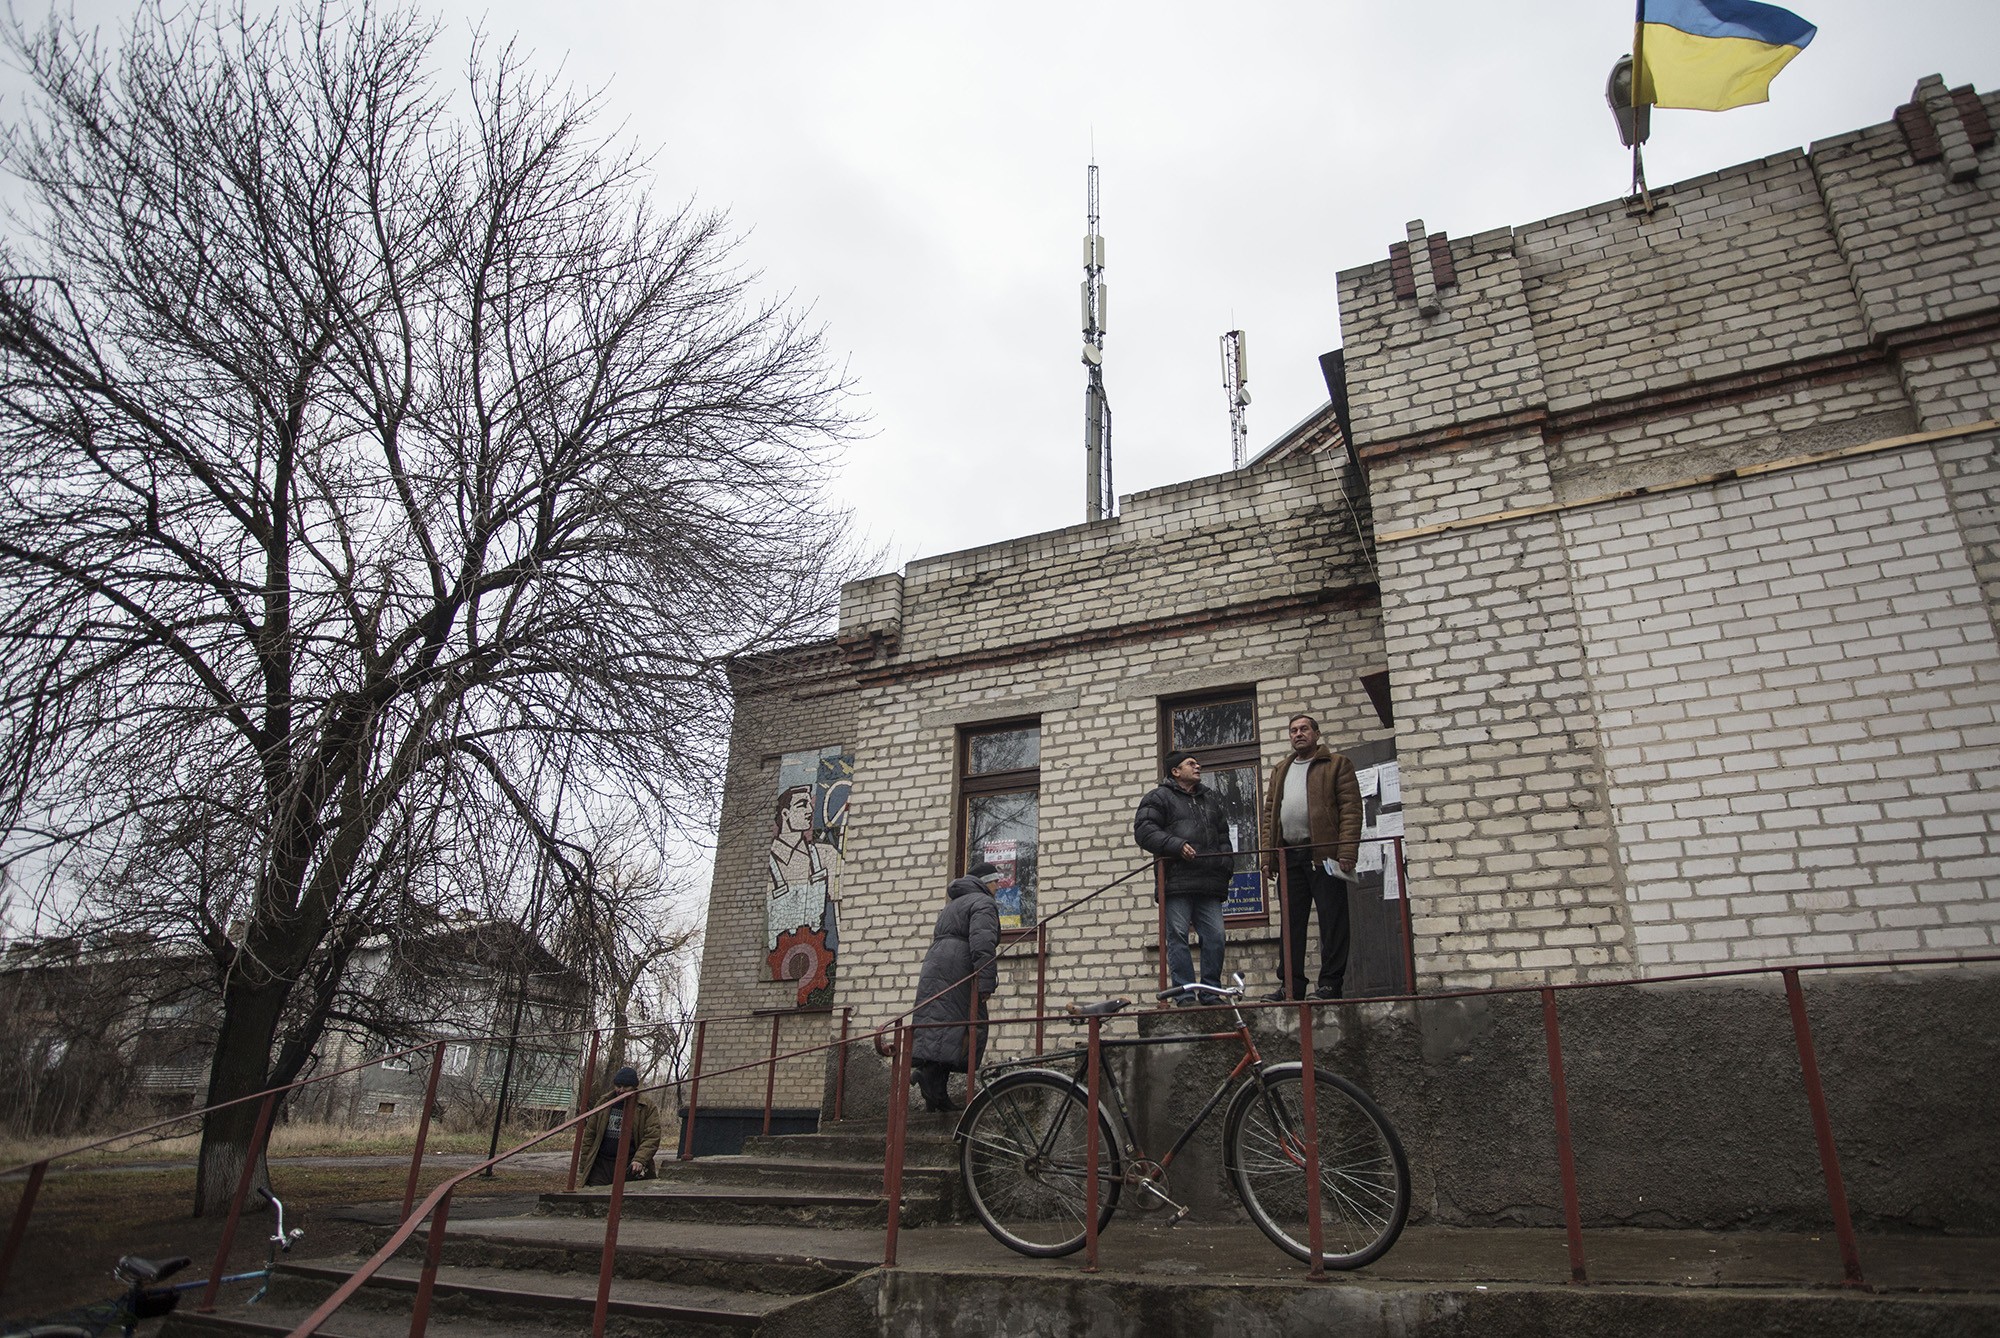 A view to a Palace of Culture which is now also a City Hall in Verkniotoretske, Donetsk Oblast on Nov. 28.